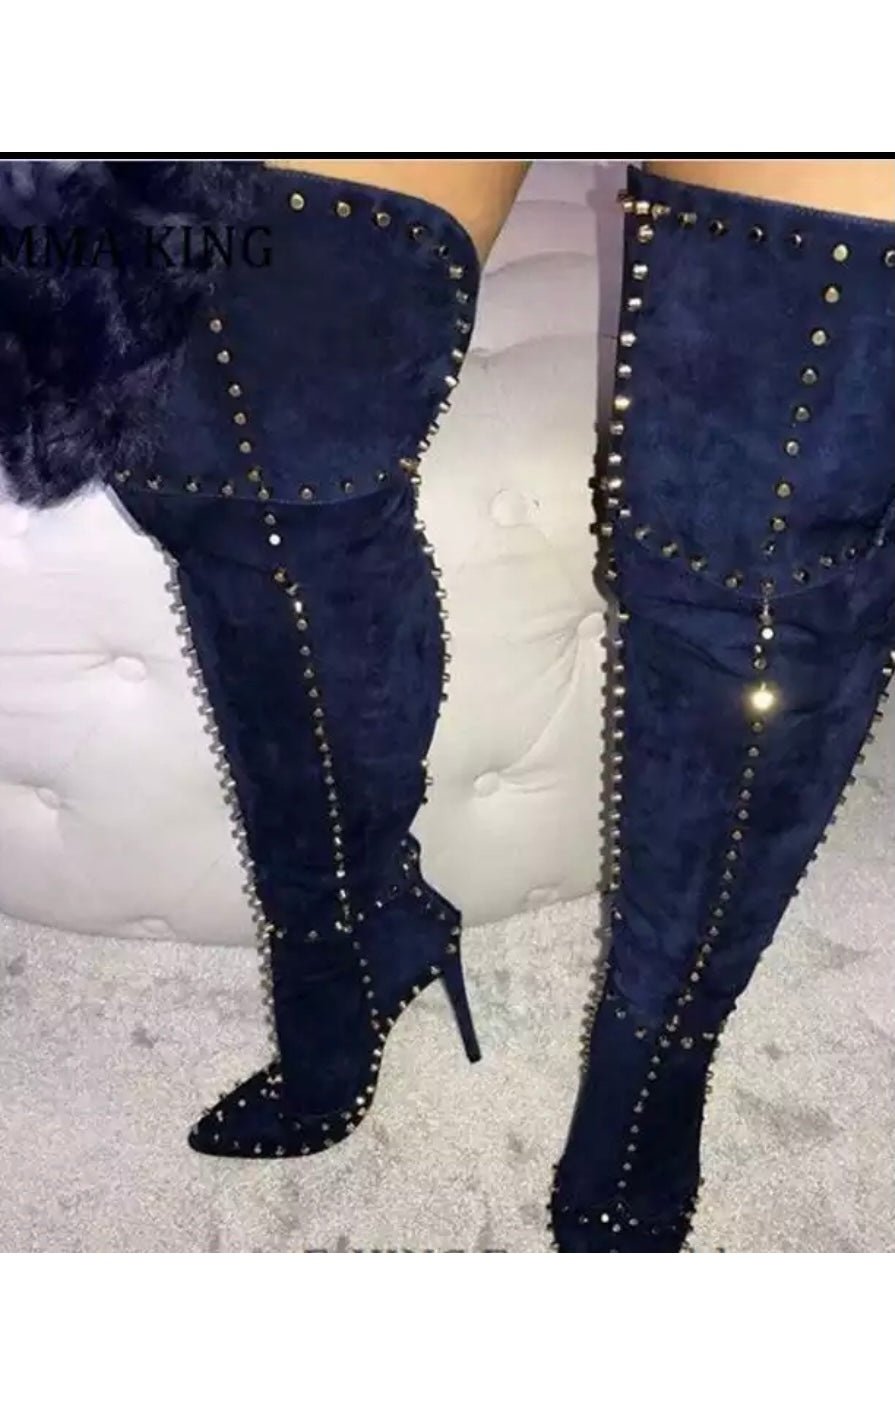 Women’s Faux Suede Studded Over The Knee High Boots Pointed Toe (Many Colors)